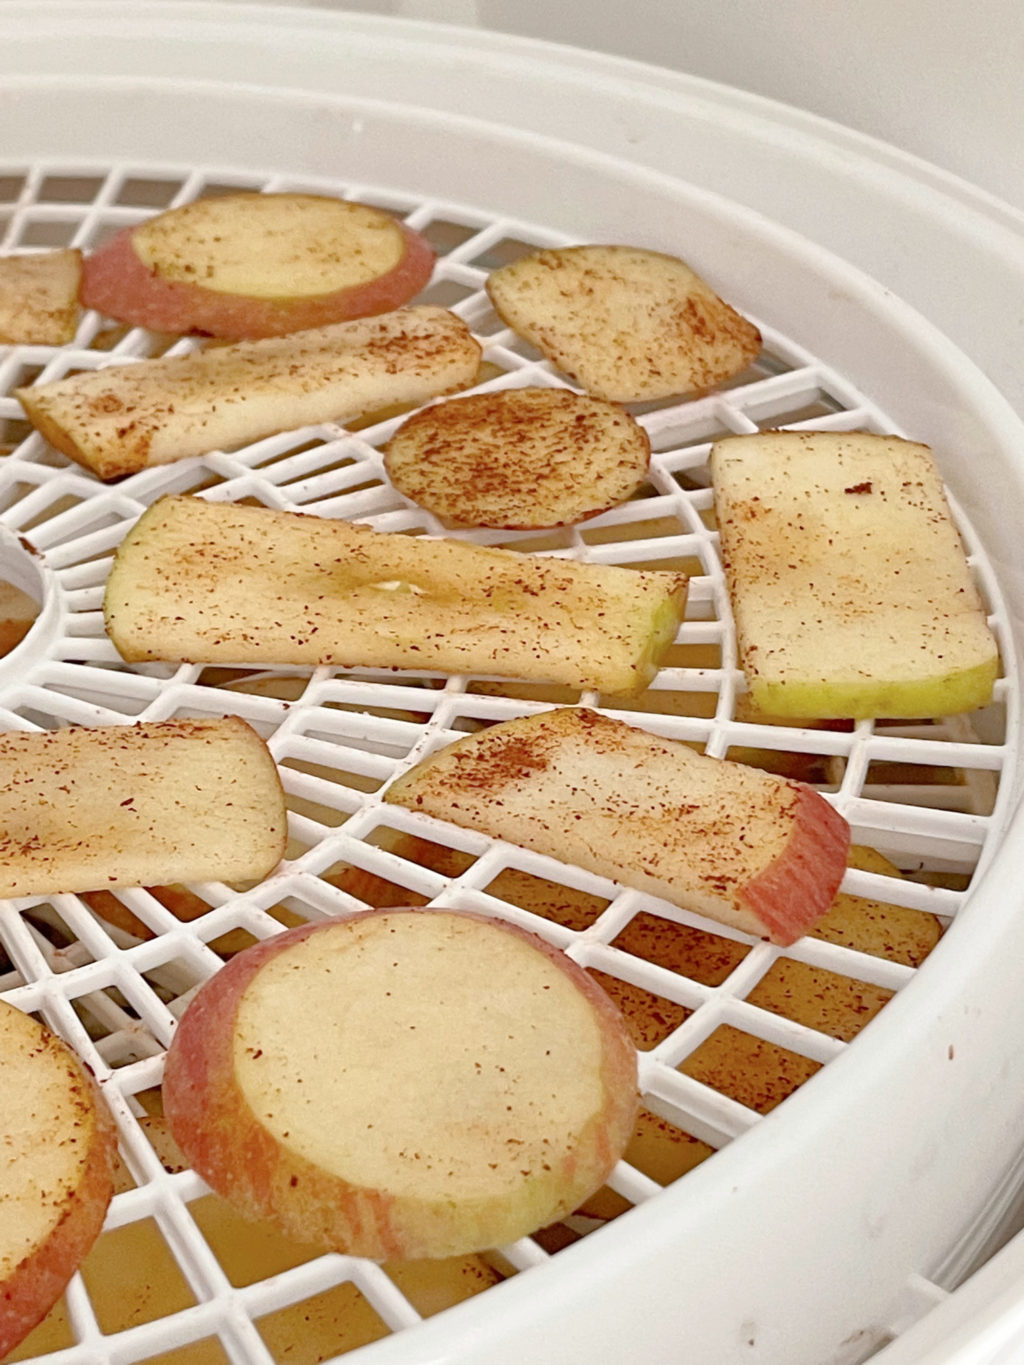 Apple slices with cinnamon on top in a dehydrator tray.